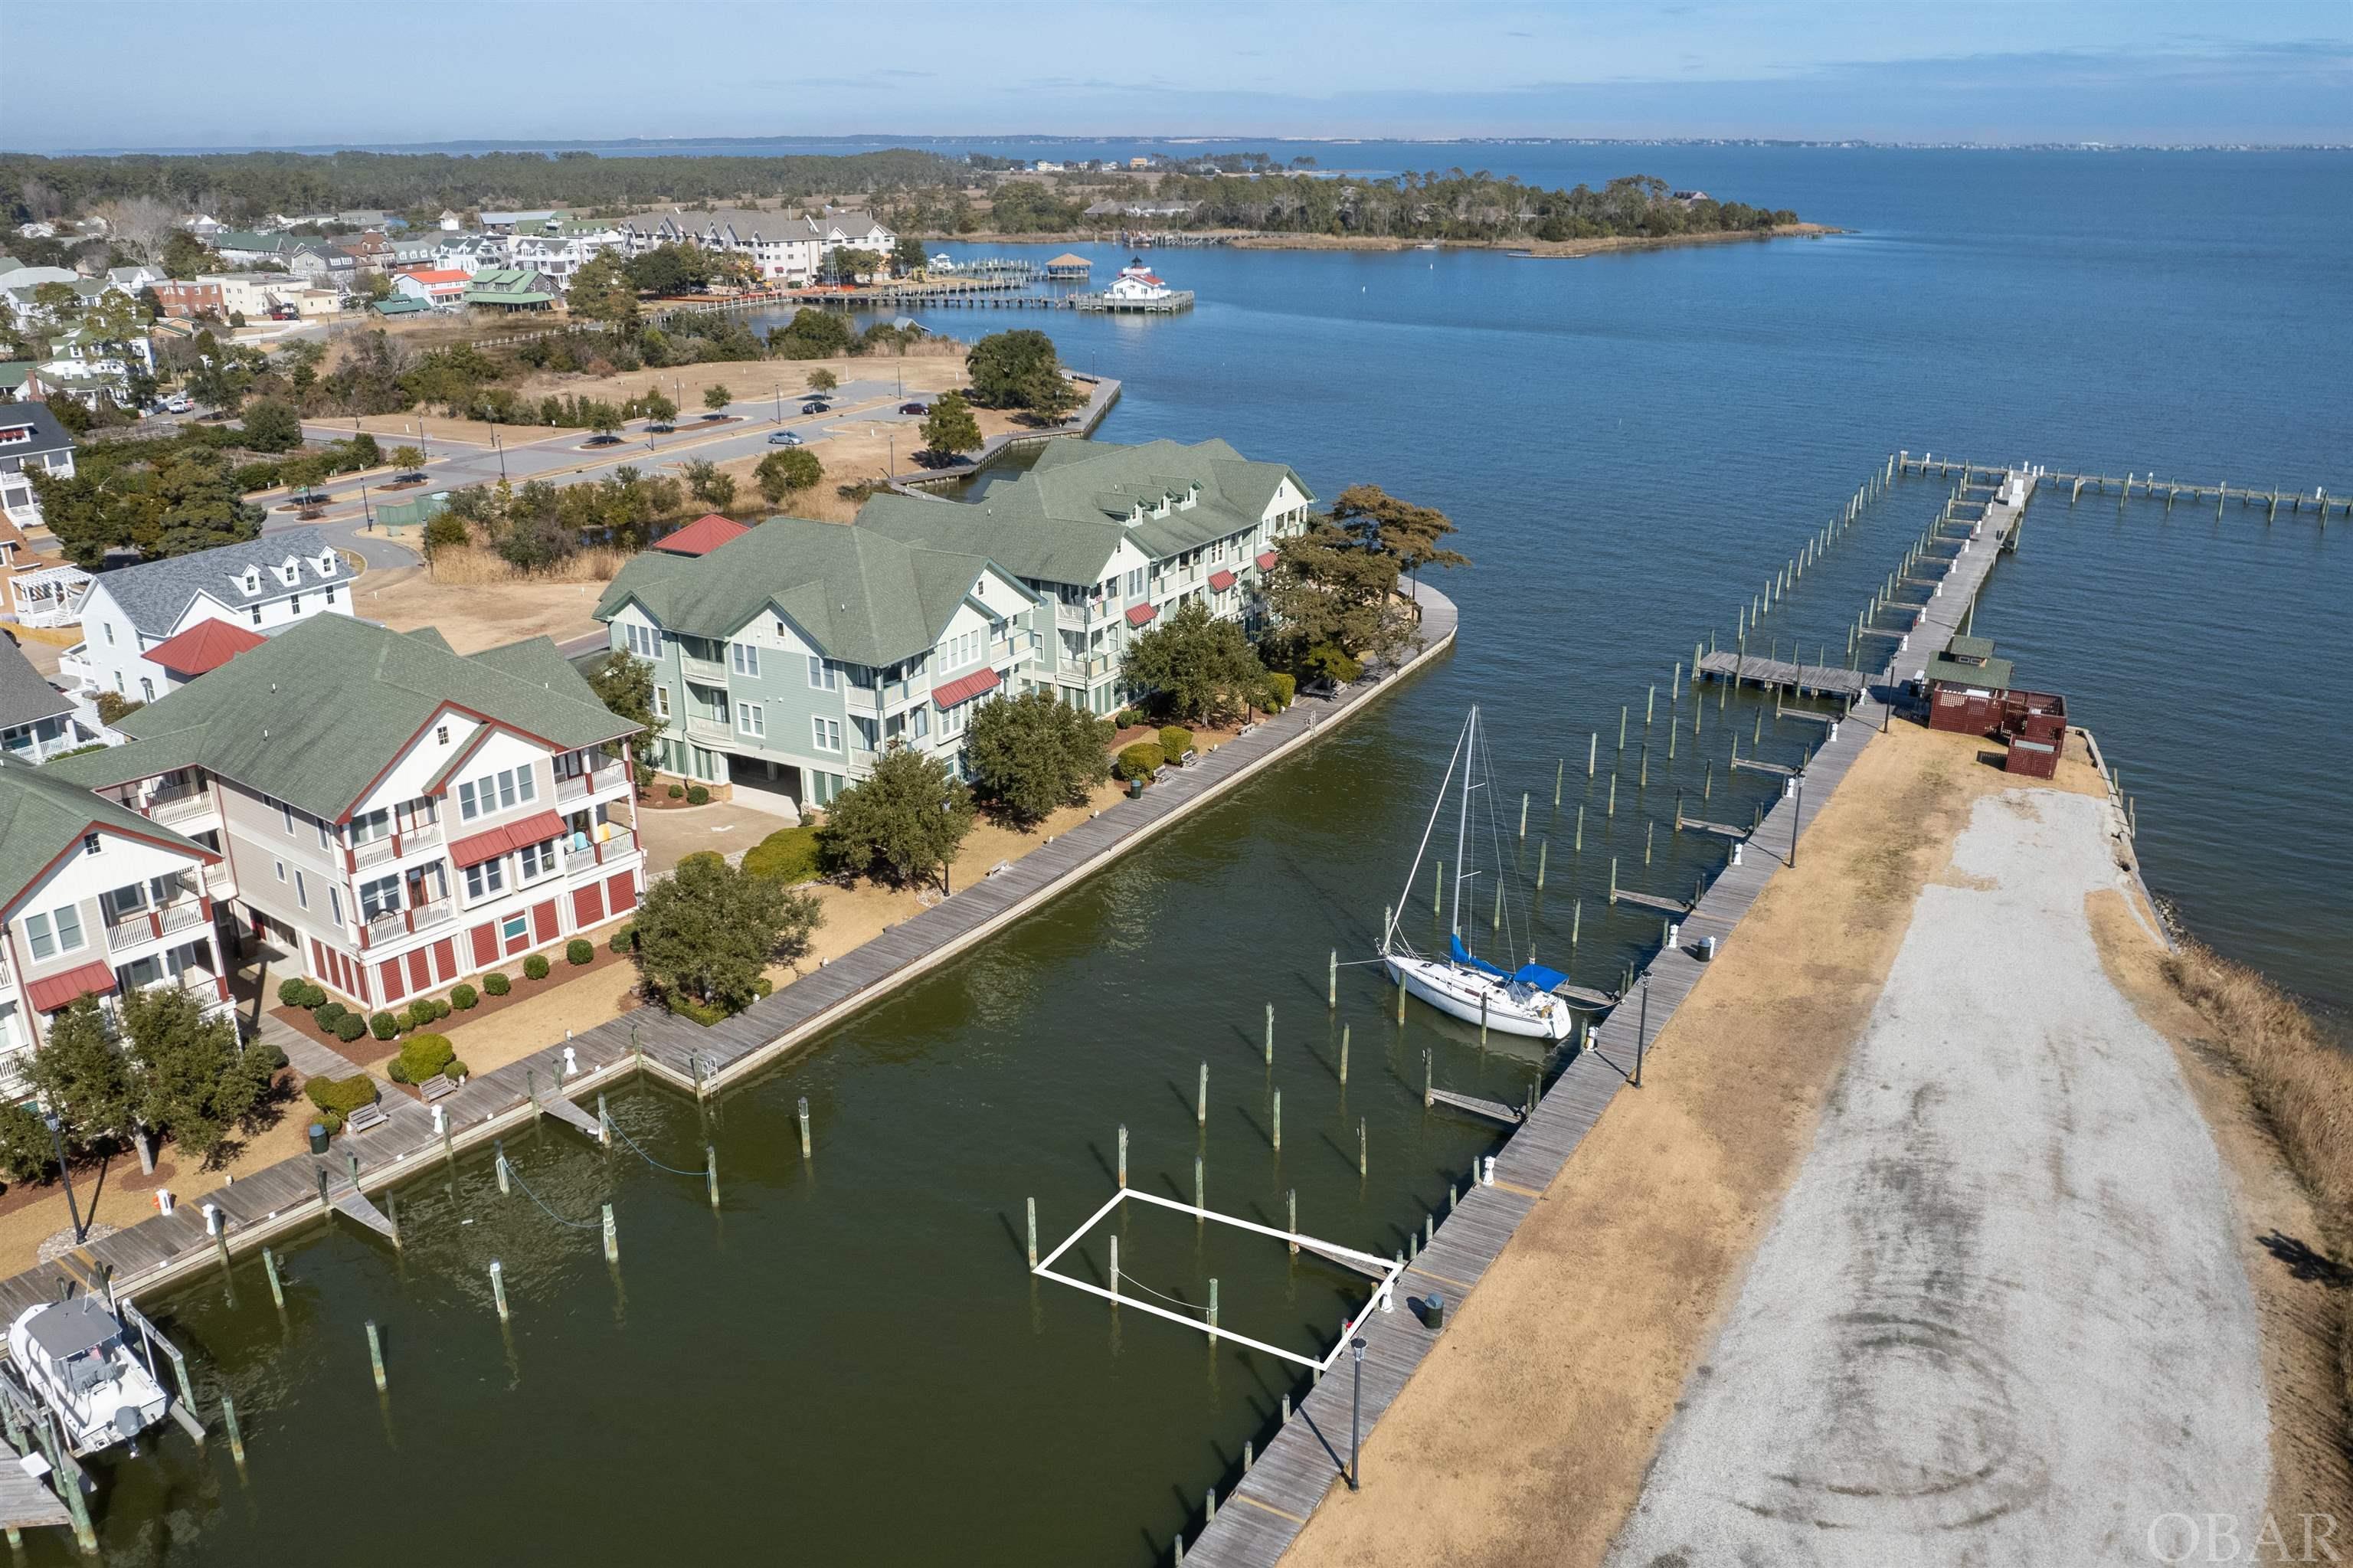 Nestled in the heart of Manteo, this Marshes Light 40X16 boat slip offers location value and easy sound access.  Only steps from the downtown waterfront, slip #16 offers on-site amenities including the "Marina House" a.k.a. the Sales Center which provides full bathing facilities and laundering services.  See associated documents for provided amenities.  Master's Association Assessment dues are $837.50 yearly and Slip Owner's Association dues are $515.00 per quarter.  See associated docs for budgets.